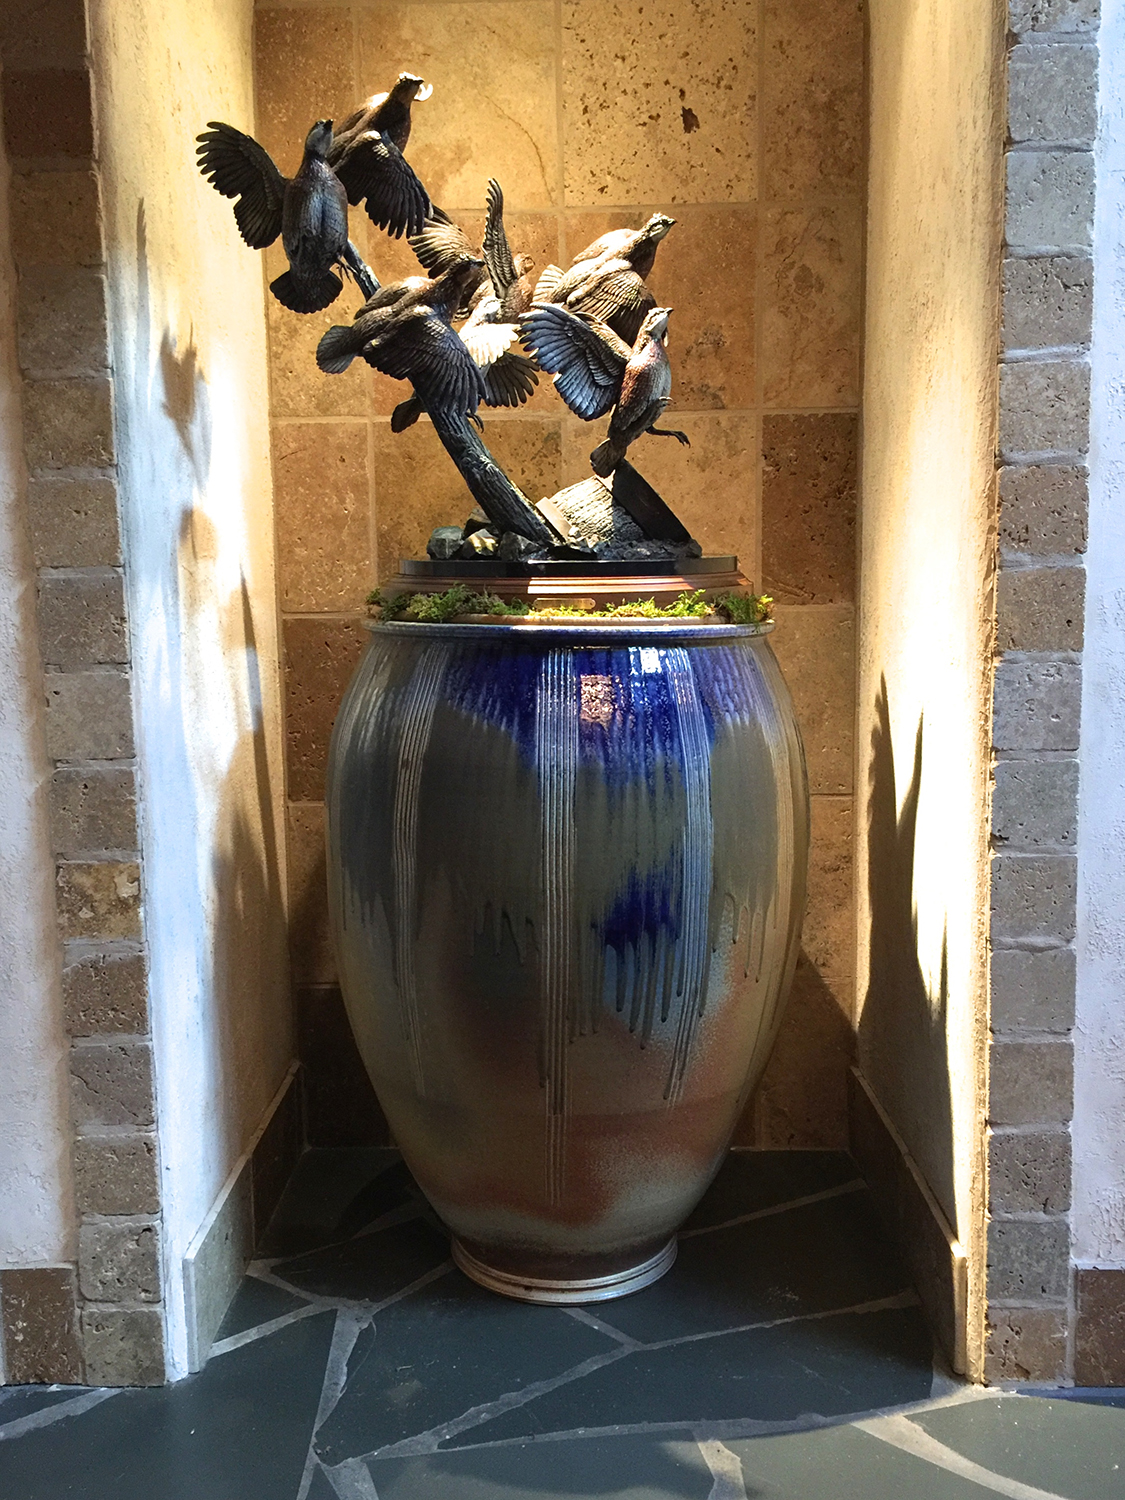   A sculpture of birds in flight is anchored by a large Cobalt Blue and Ash glazed pot in this home in Pinehurst, NC.  